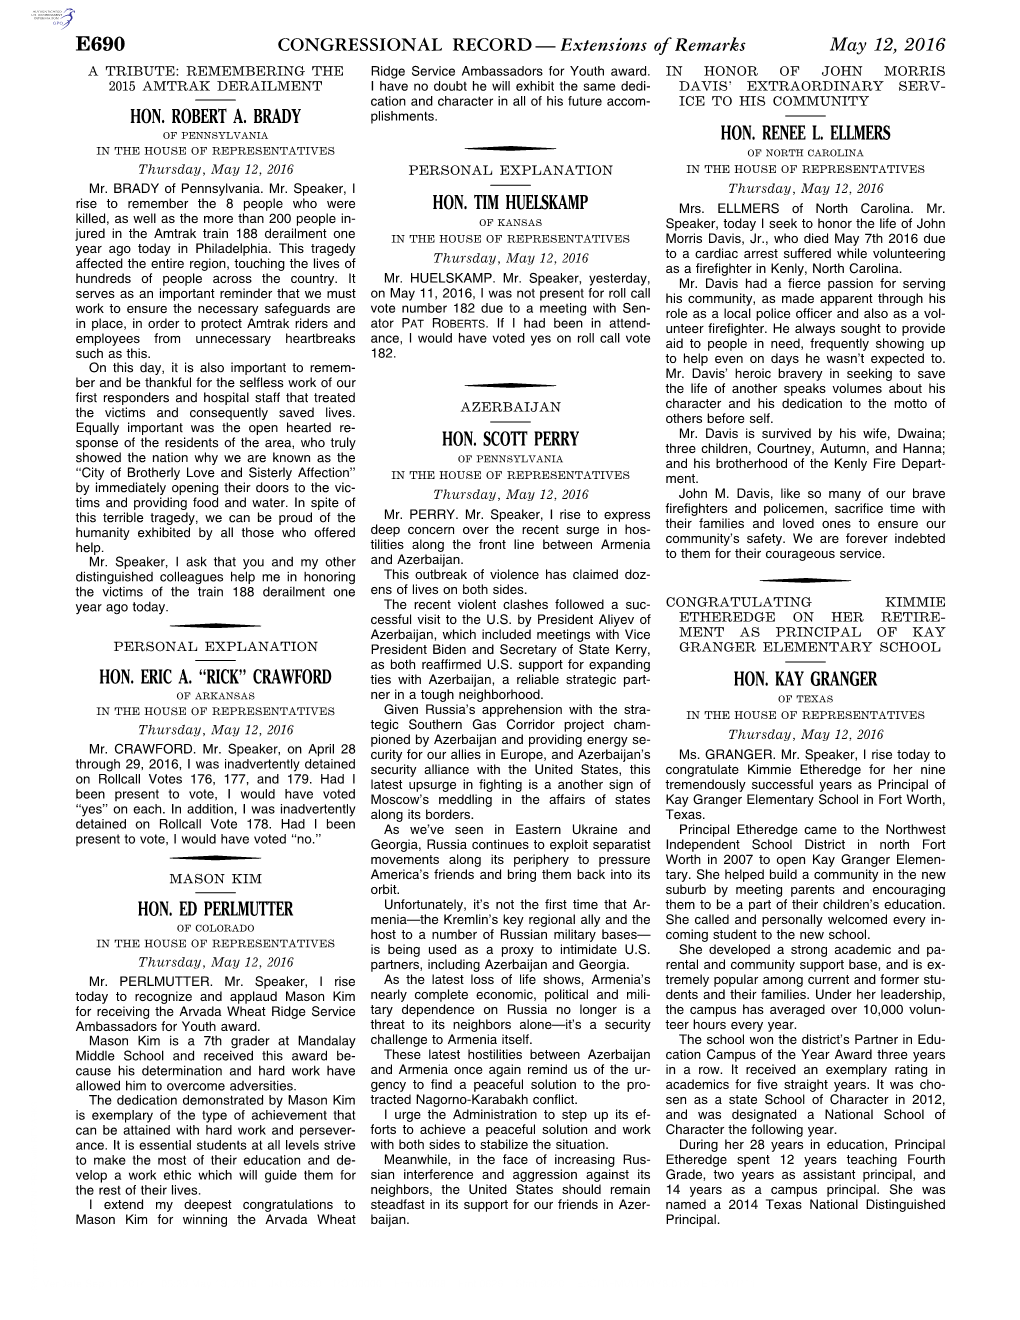 CONGRESSIONAL RECORD— Extensions of Remarks E690 HON. ROBERT A. BRADY HON. ERIC A. ''RICK'' CRAWFORD HON. ED PERLMUTTE